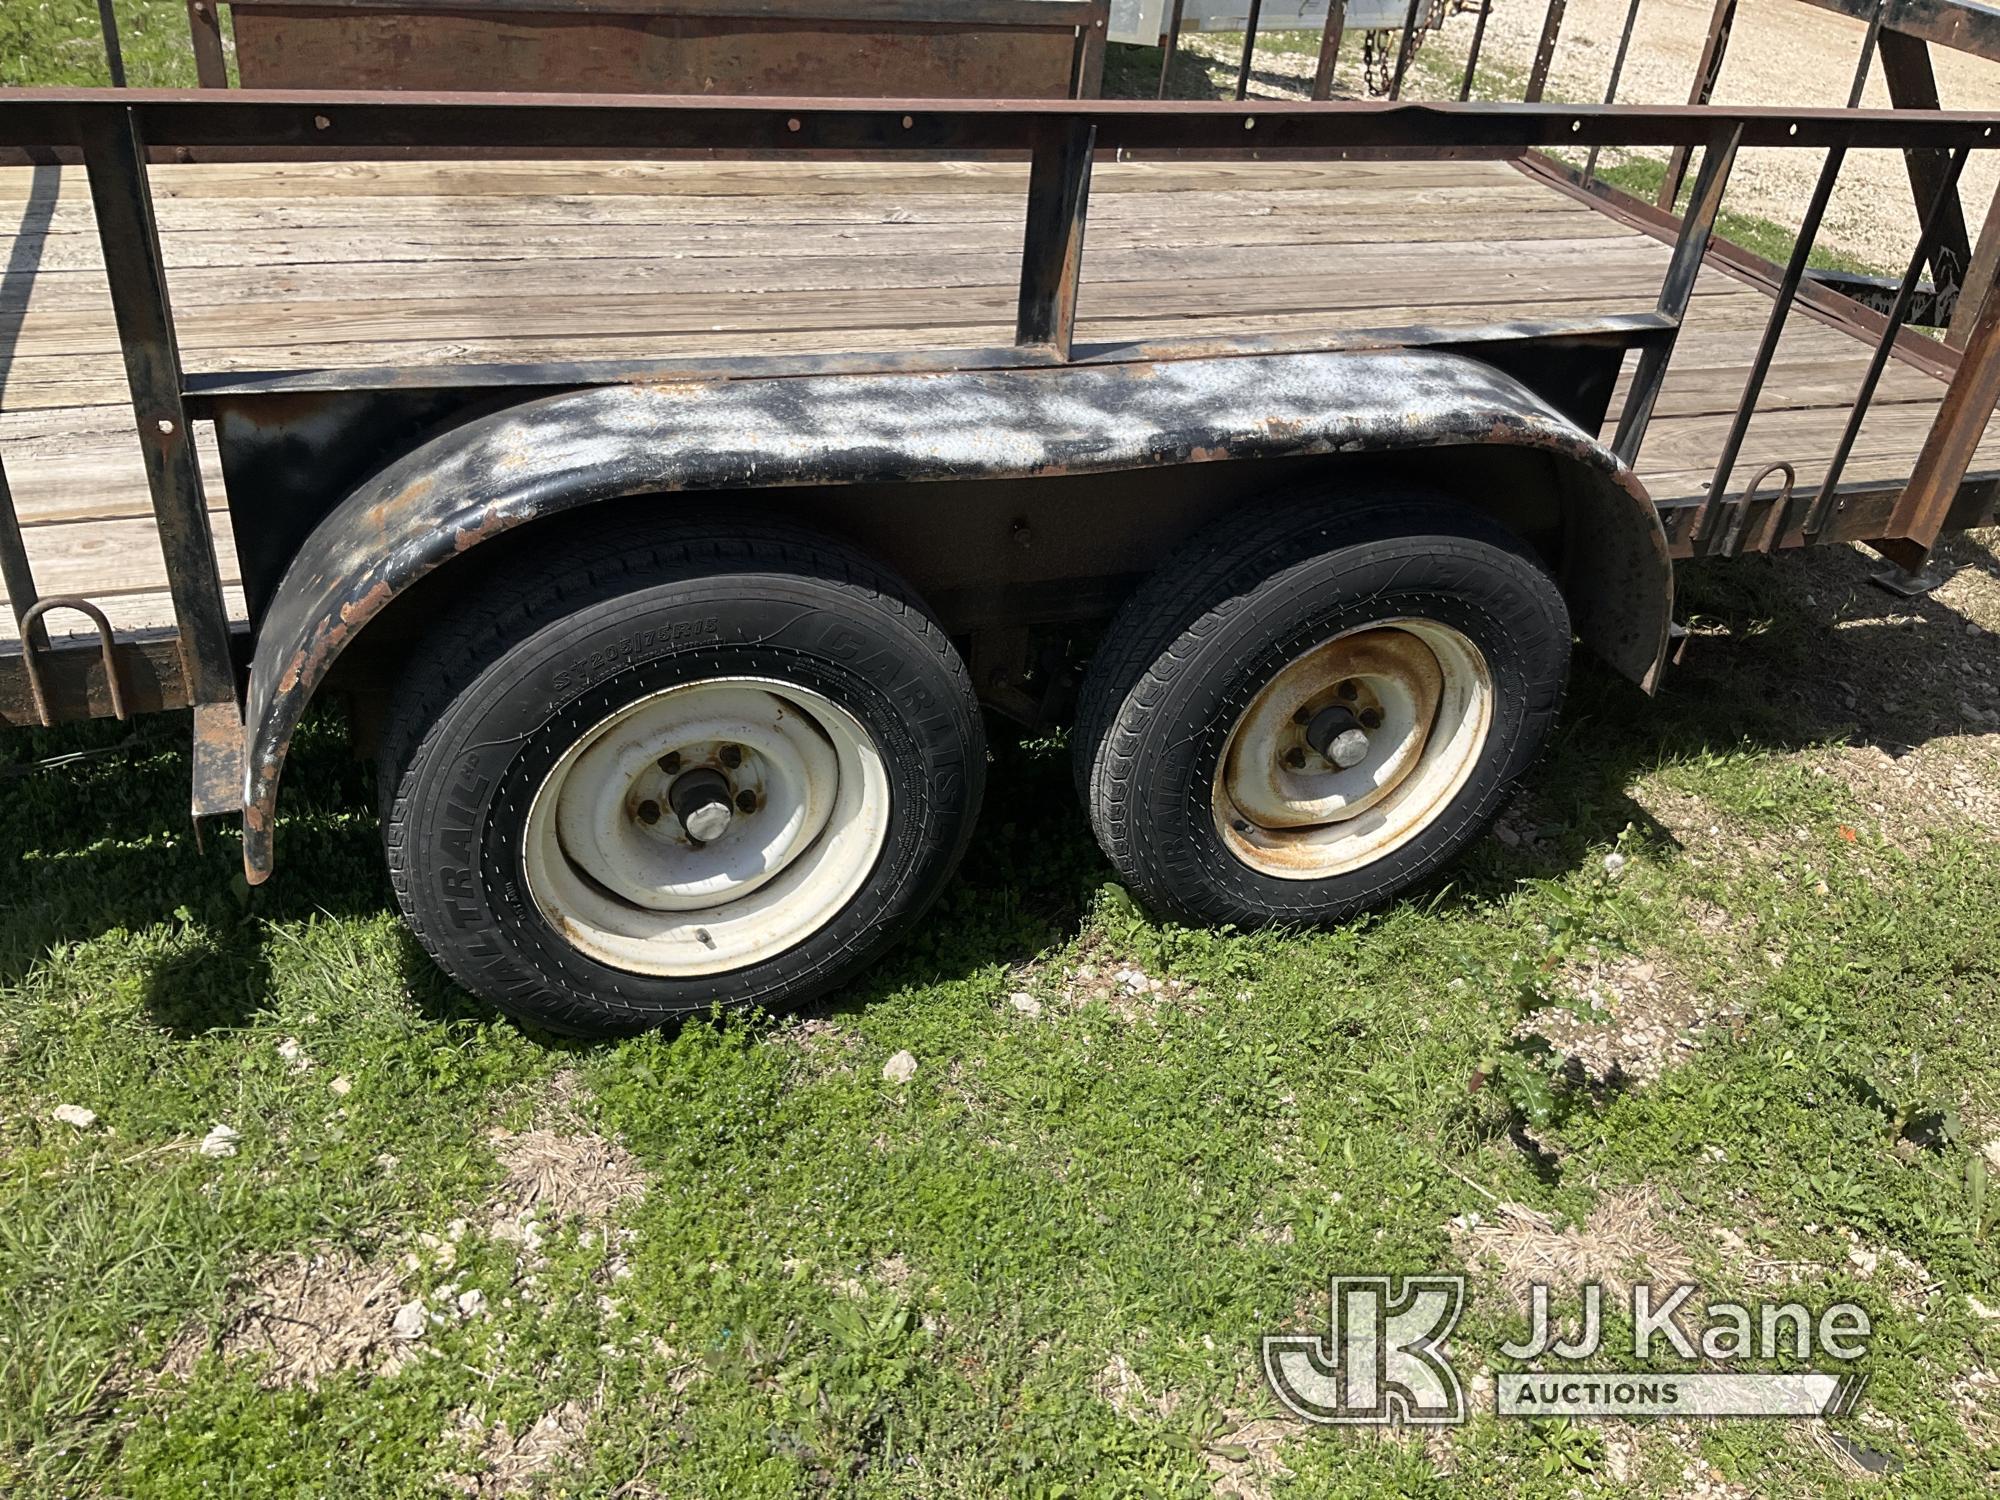 (Waxahachie, TX) 1995 Jones T/A Tagalong Flatbed Trailer, City of Plano Owned No Title